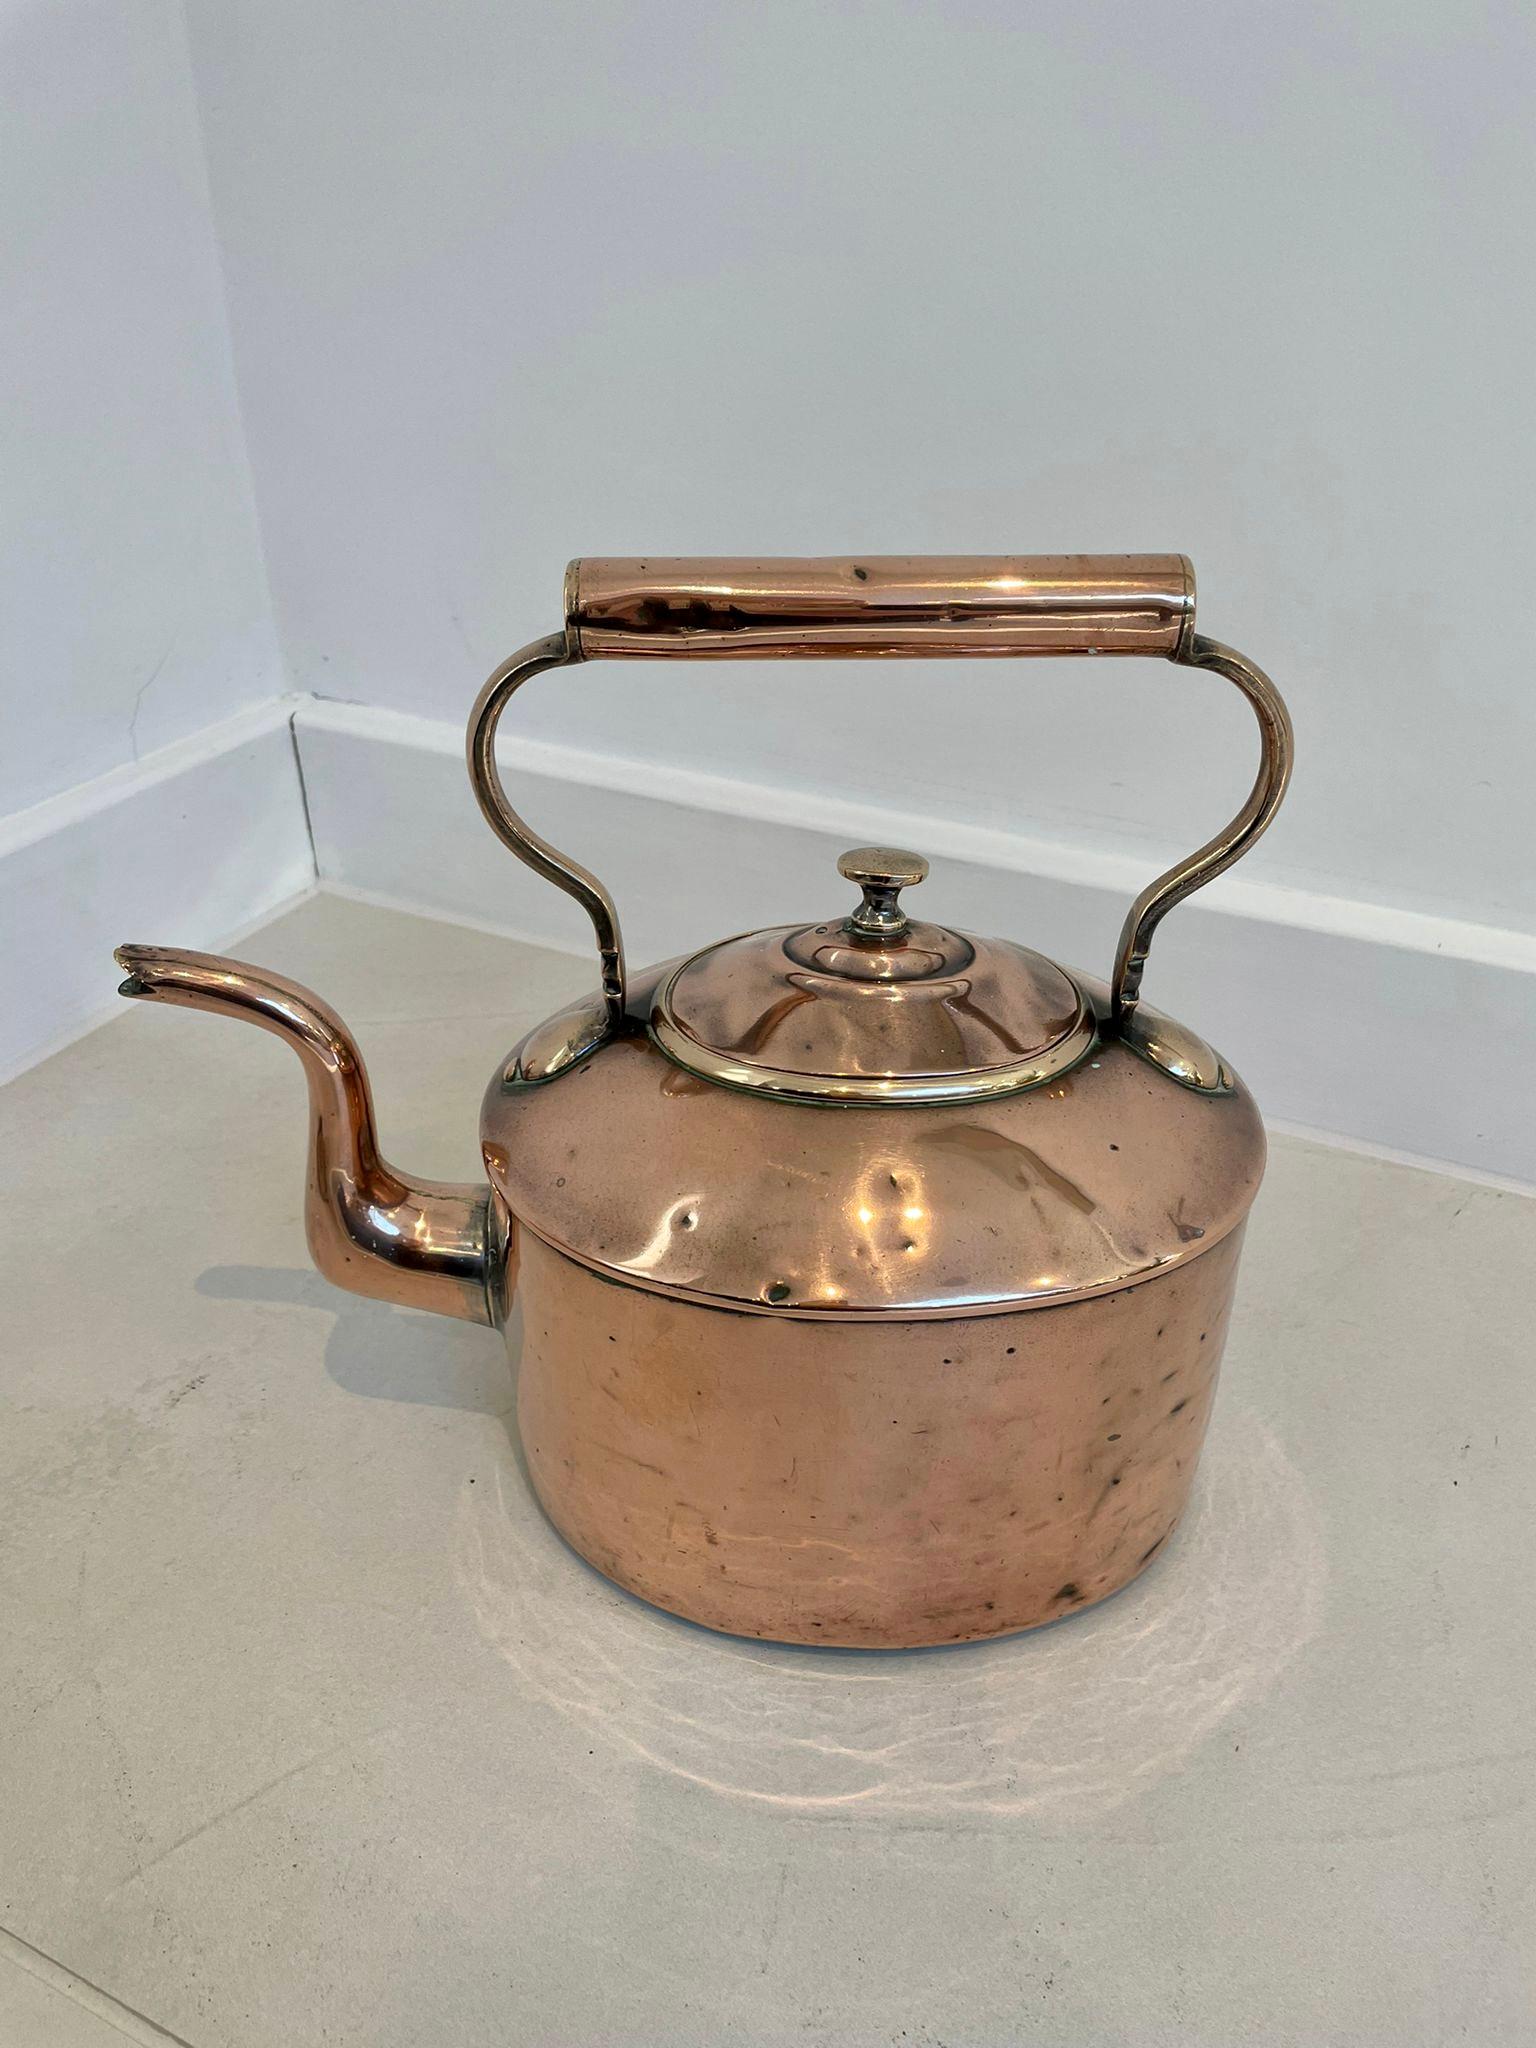 Antique George III quality oval copper kettle having a quality oval copper kettle with a shaped handle, spout and a removable lid.

Measures: H 29 x 17 x 31cm
Date 1800.
 